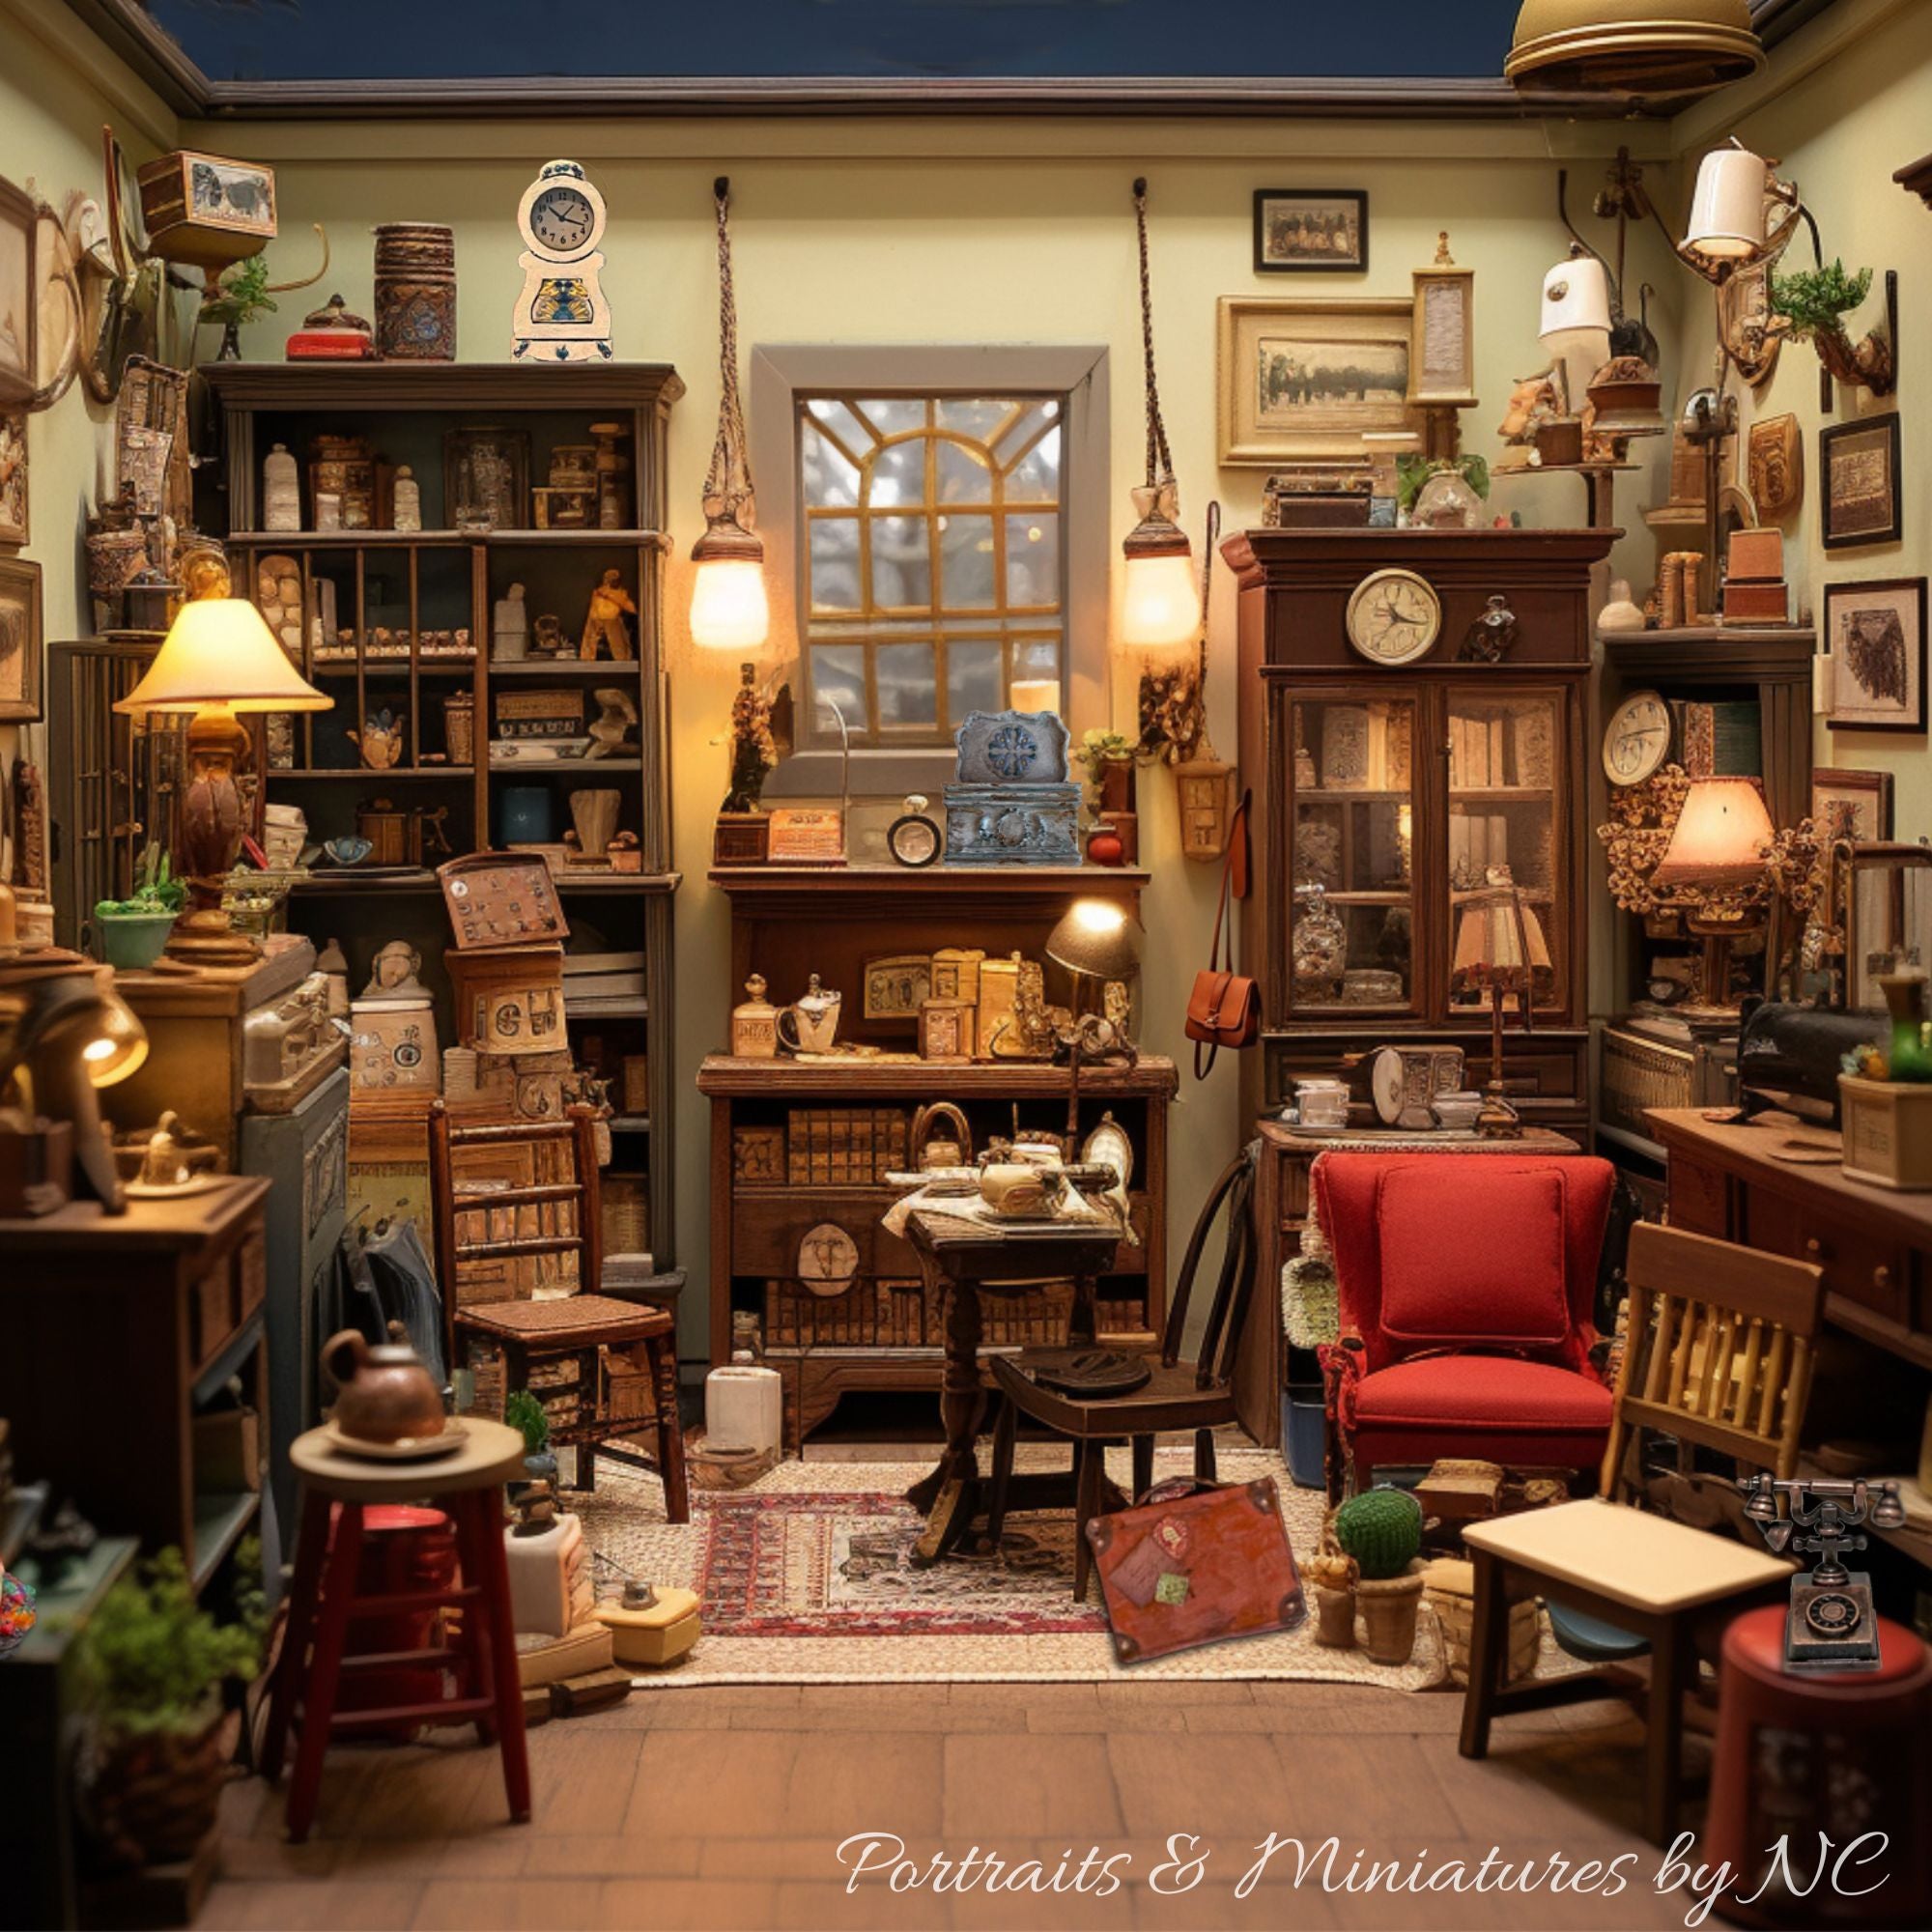 Miniature second hand store